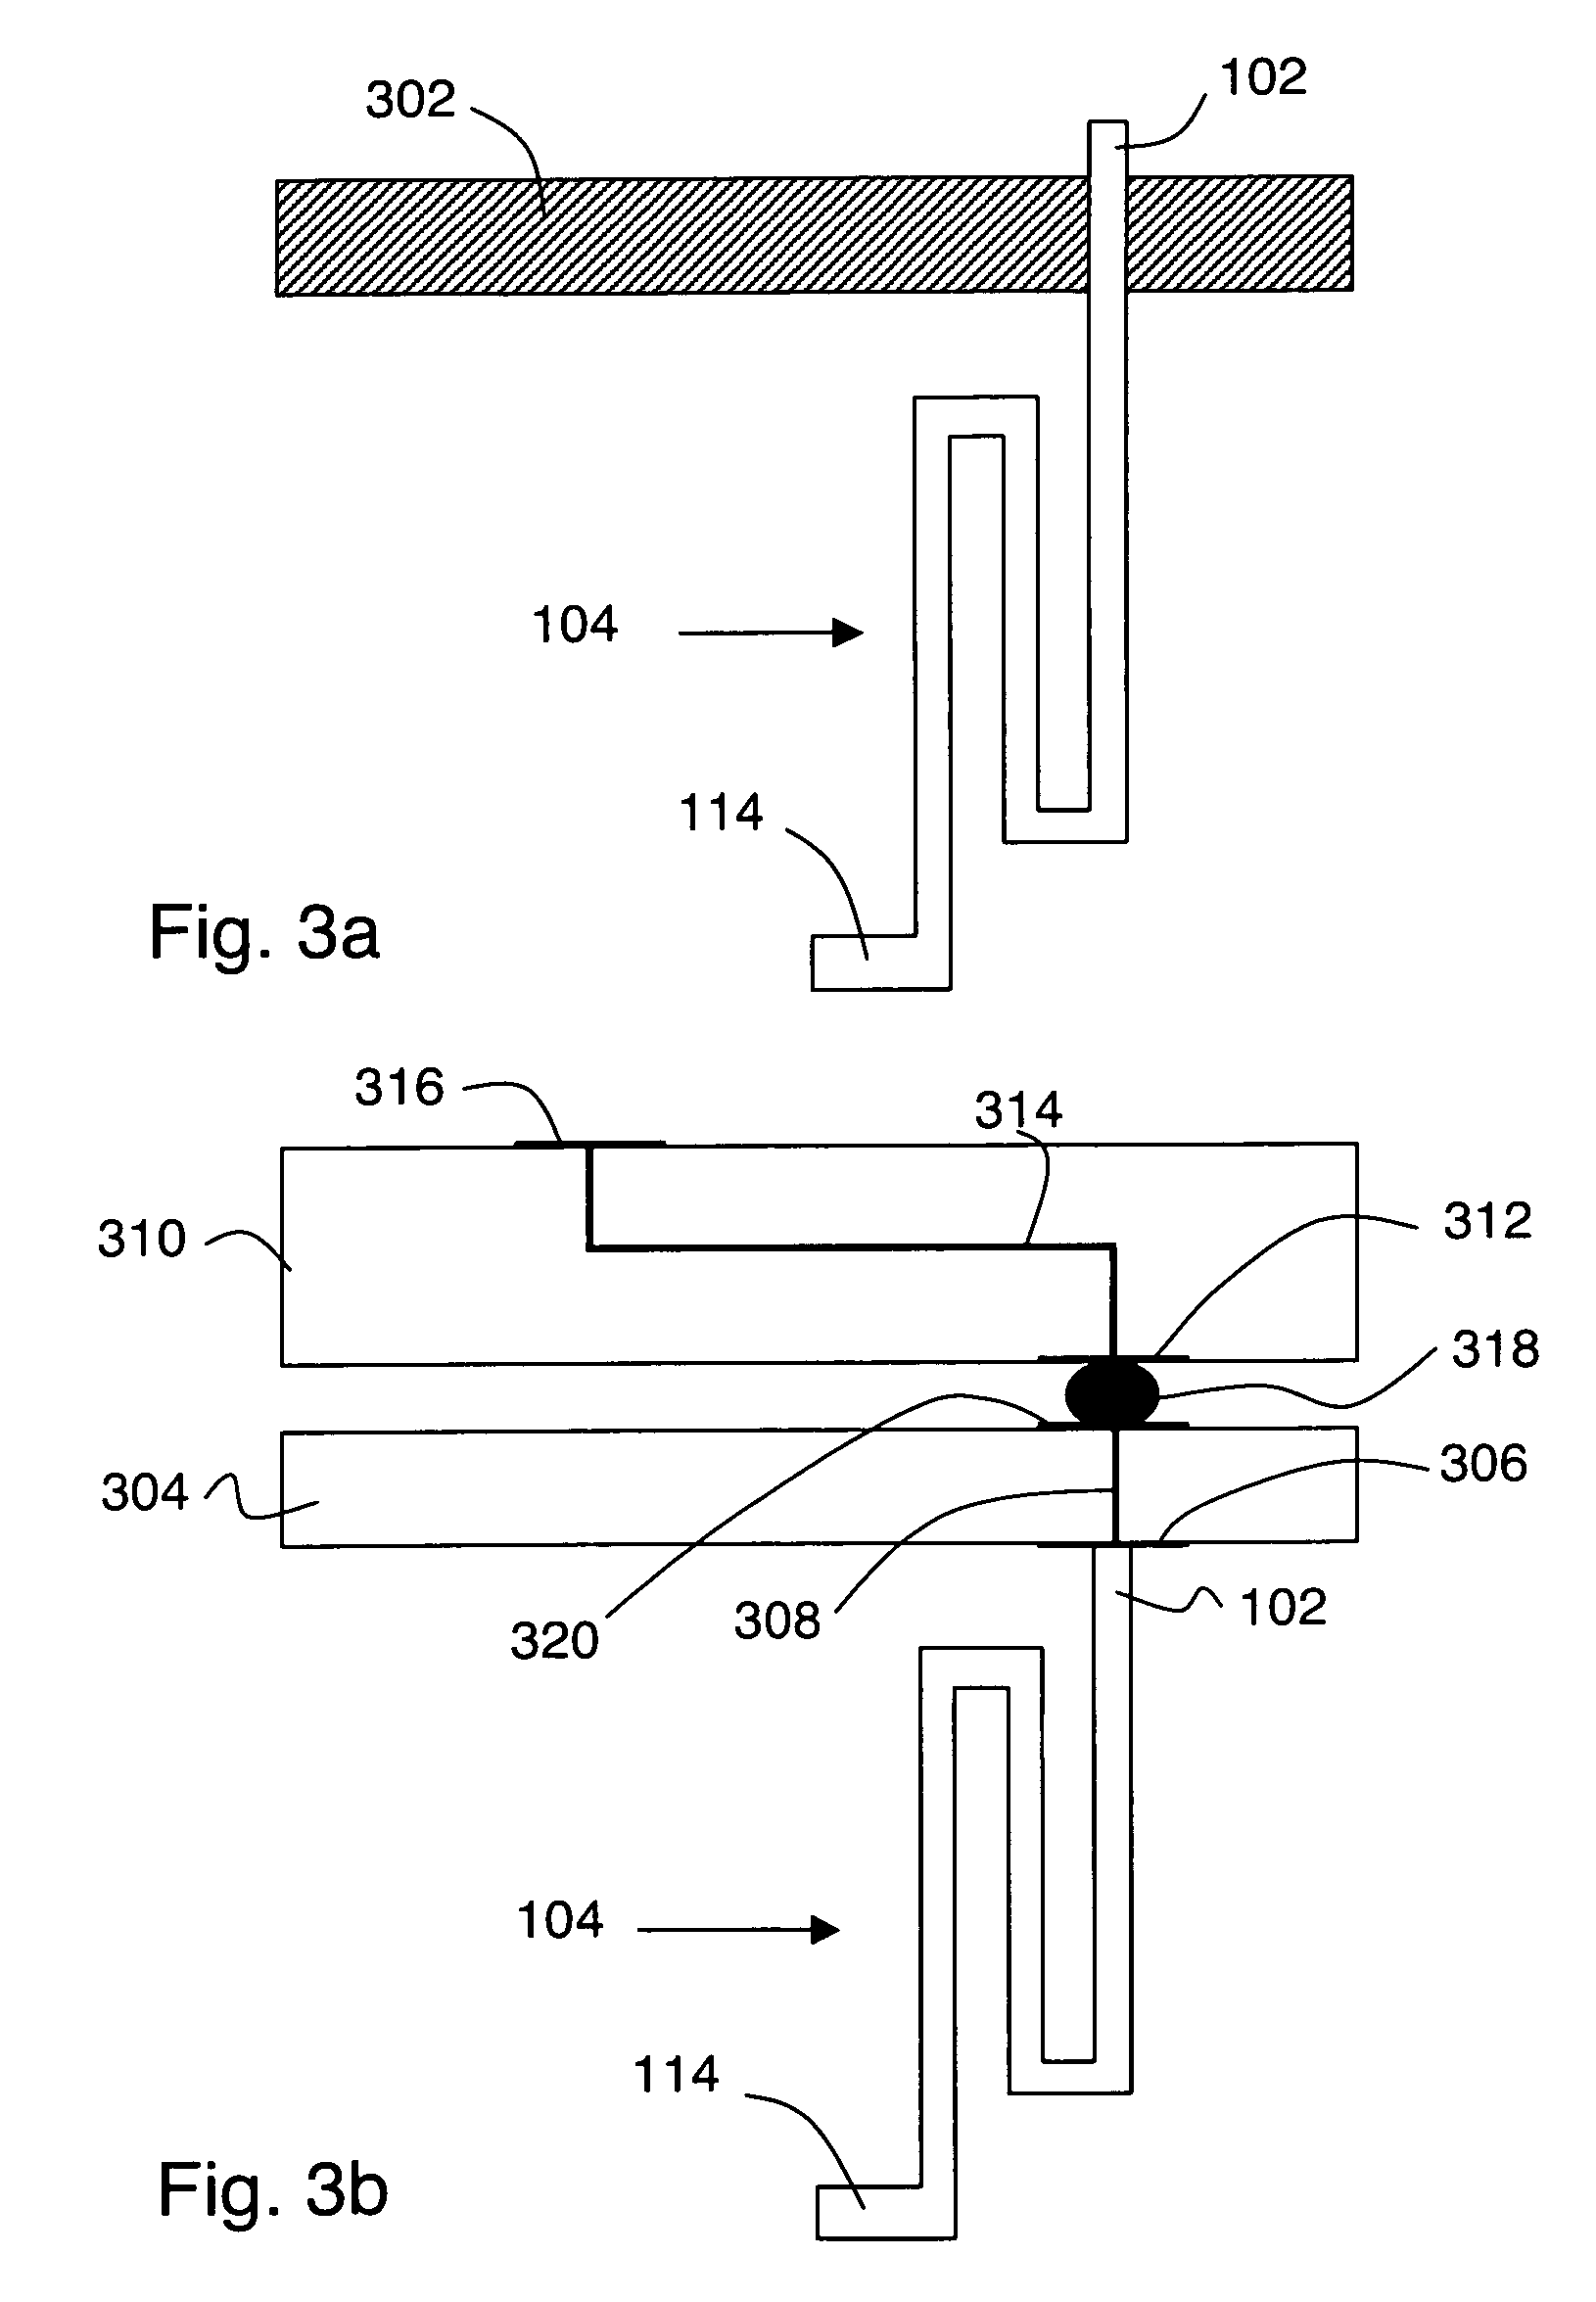 Low profile probe having improved mechanical scrub and reduced contact inductance